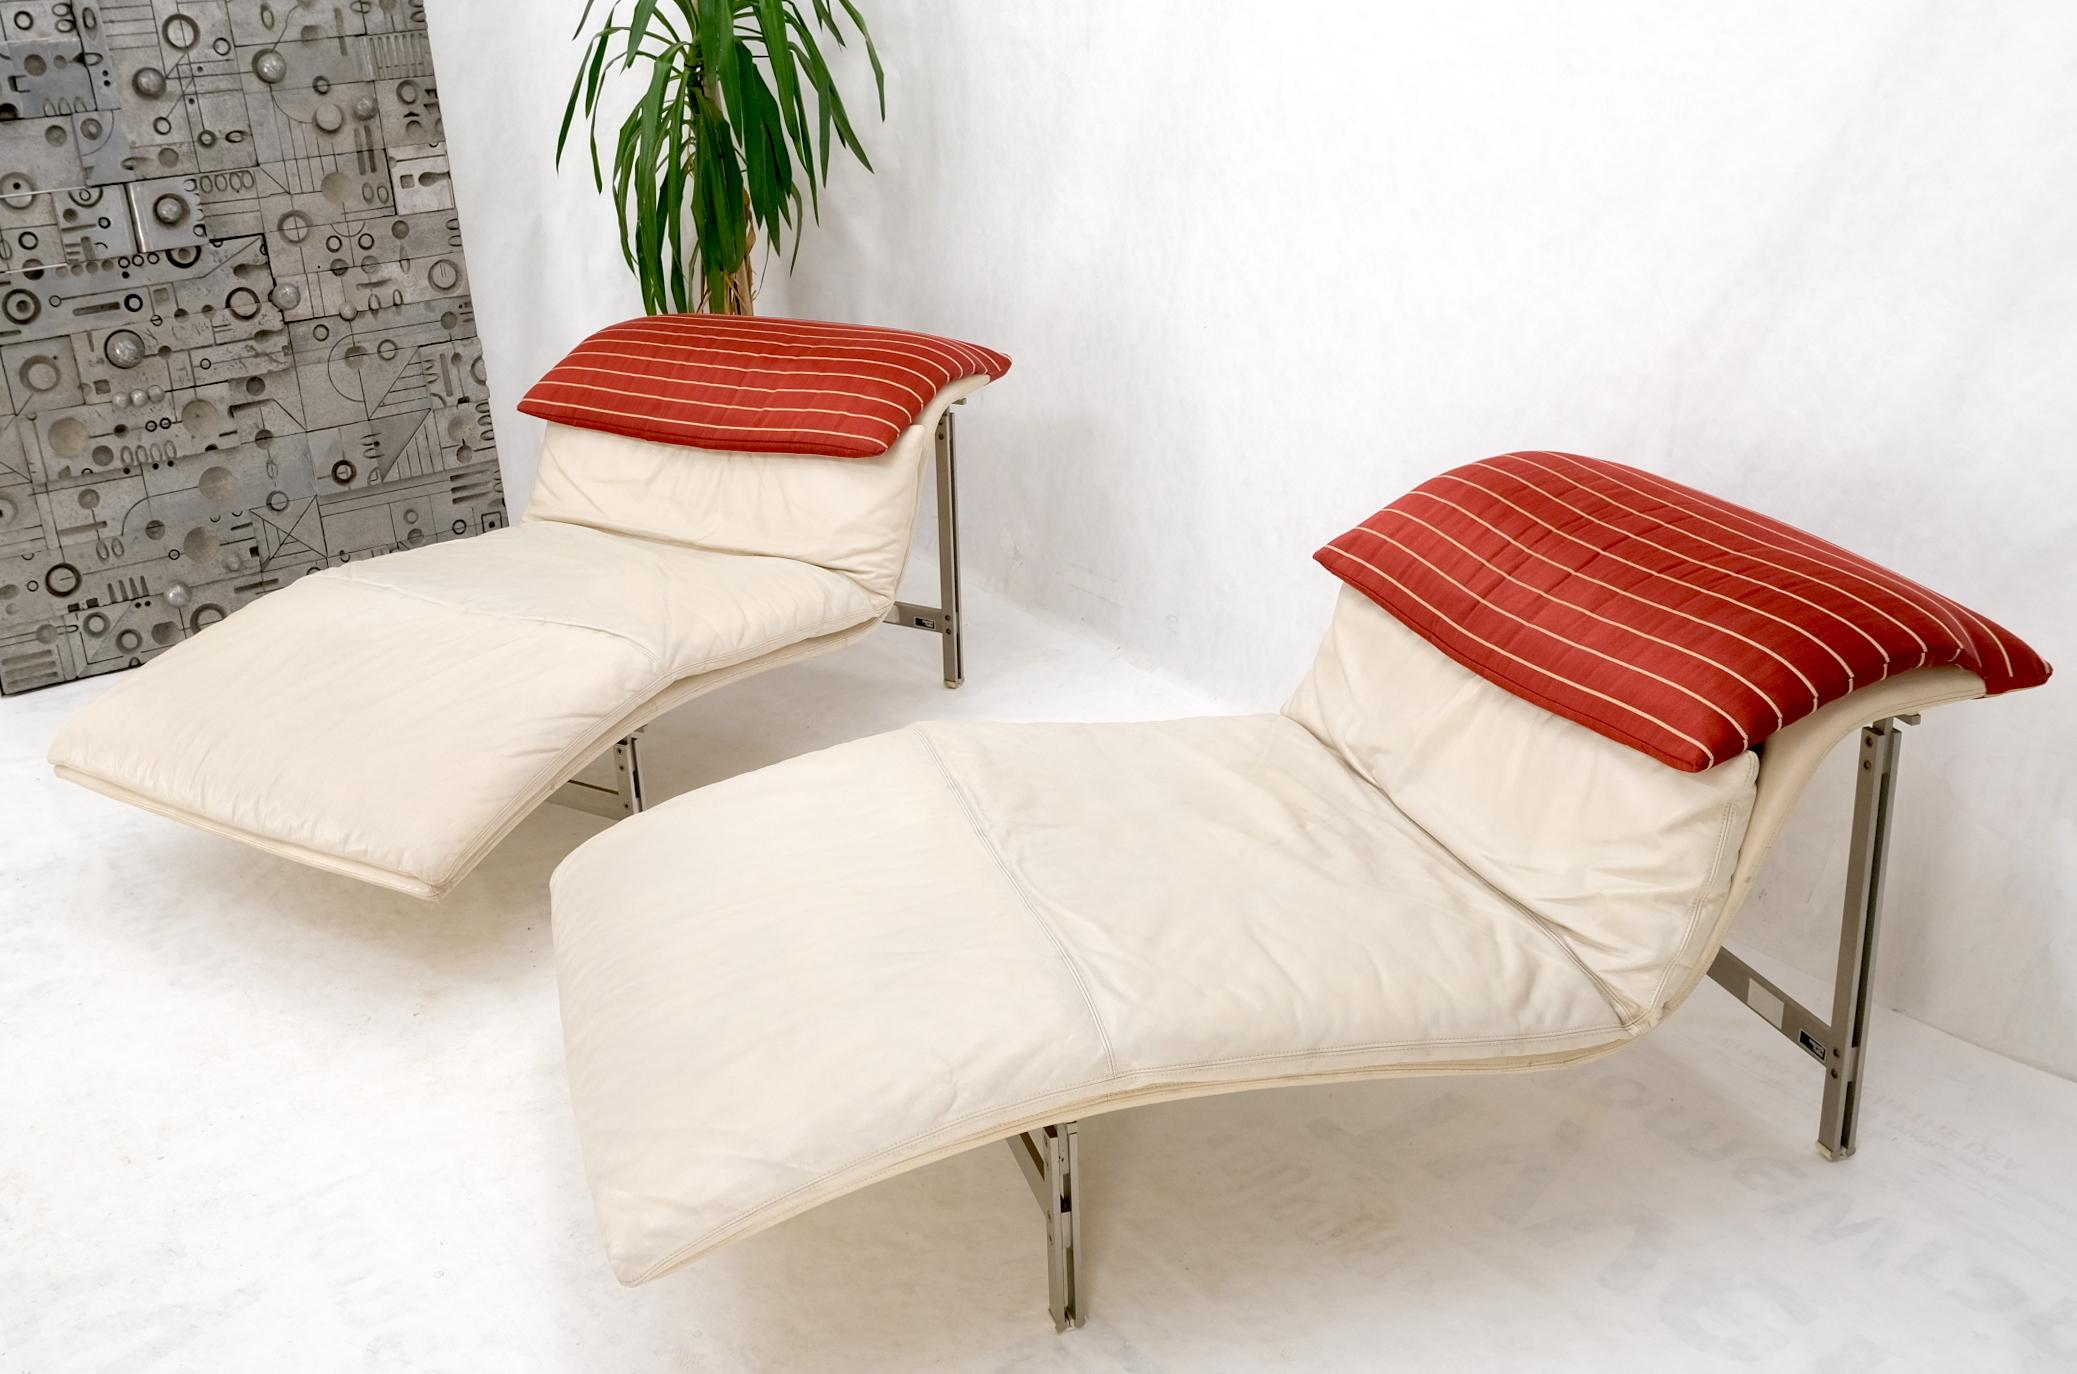 Pair of Sapority Italian Mid Century Modern Leather Chaise Lounges In Good Condition For Sale In Rockaway, NJ